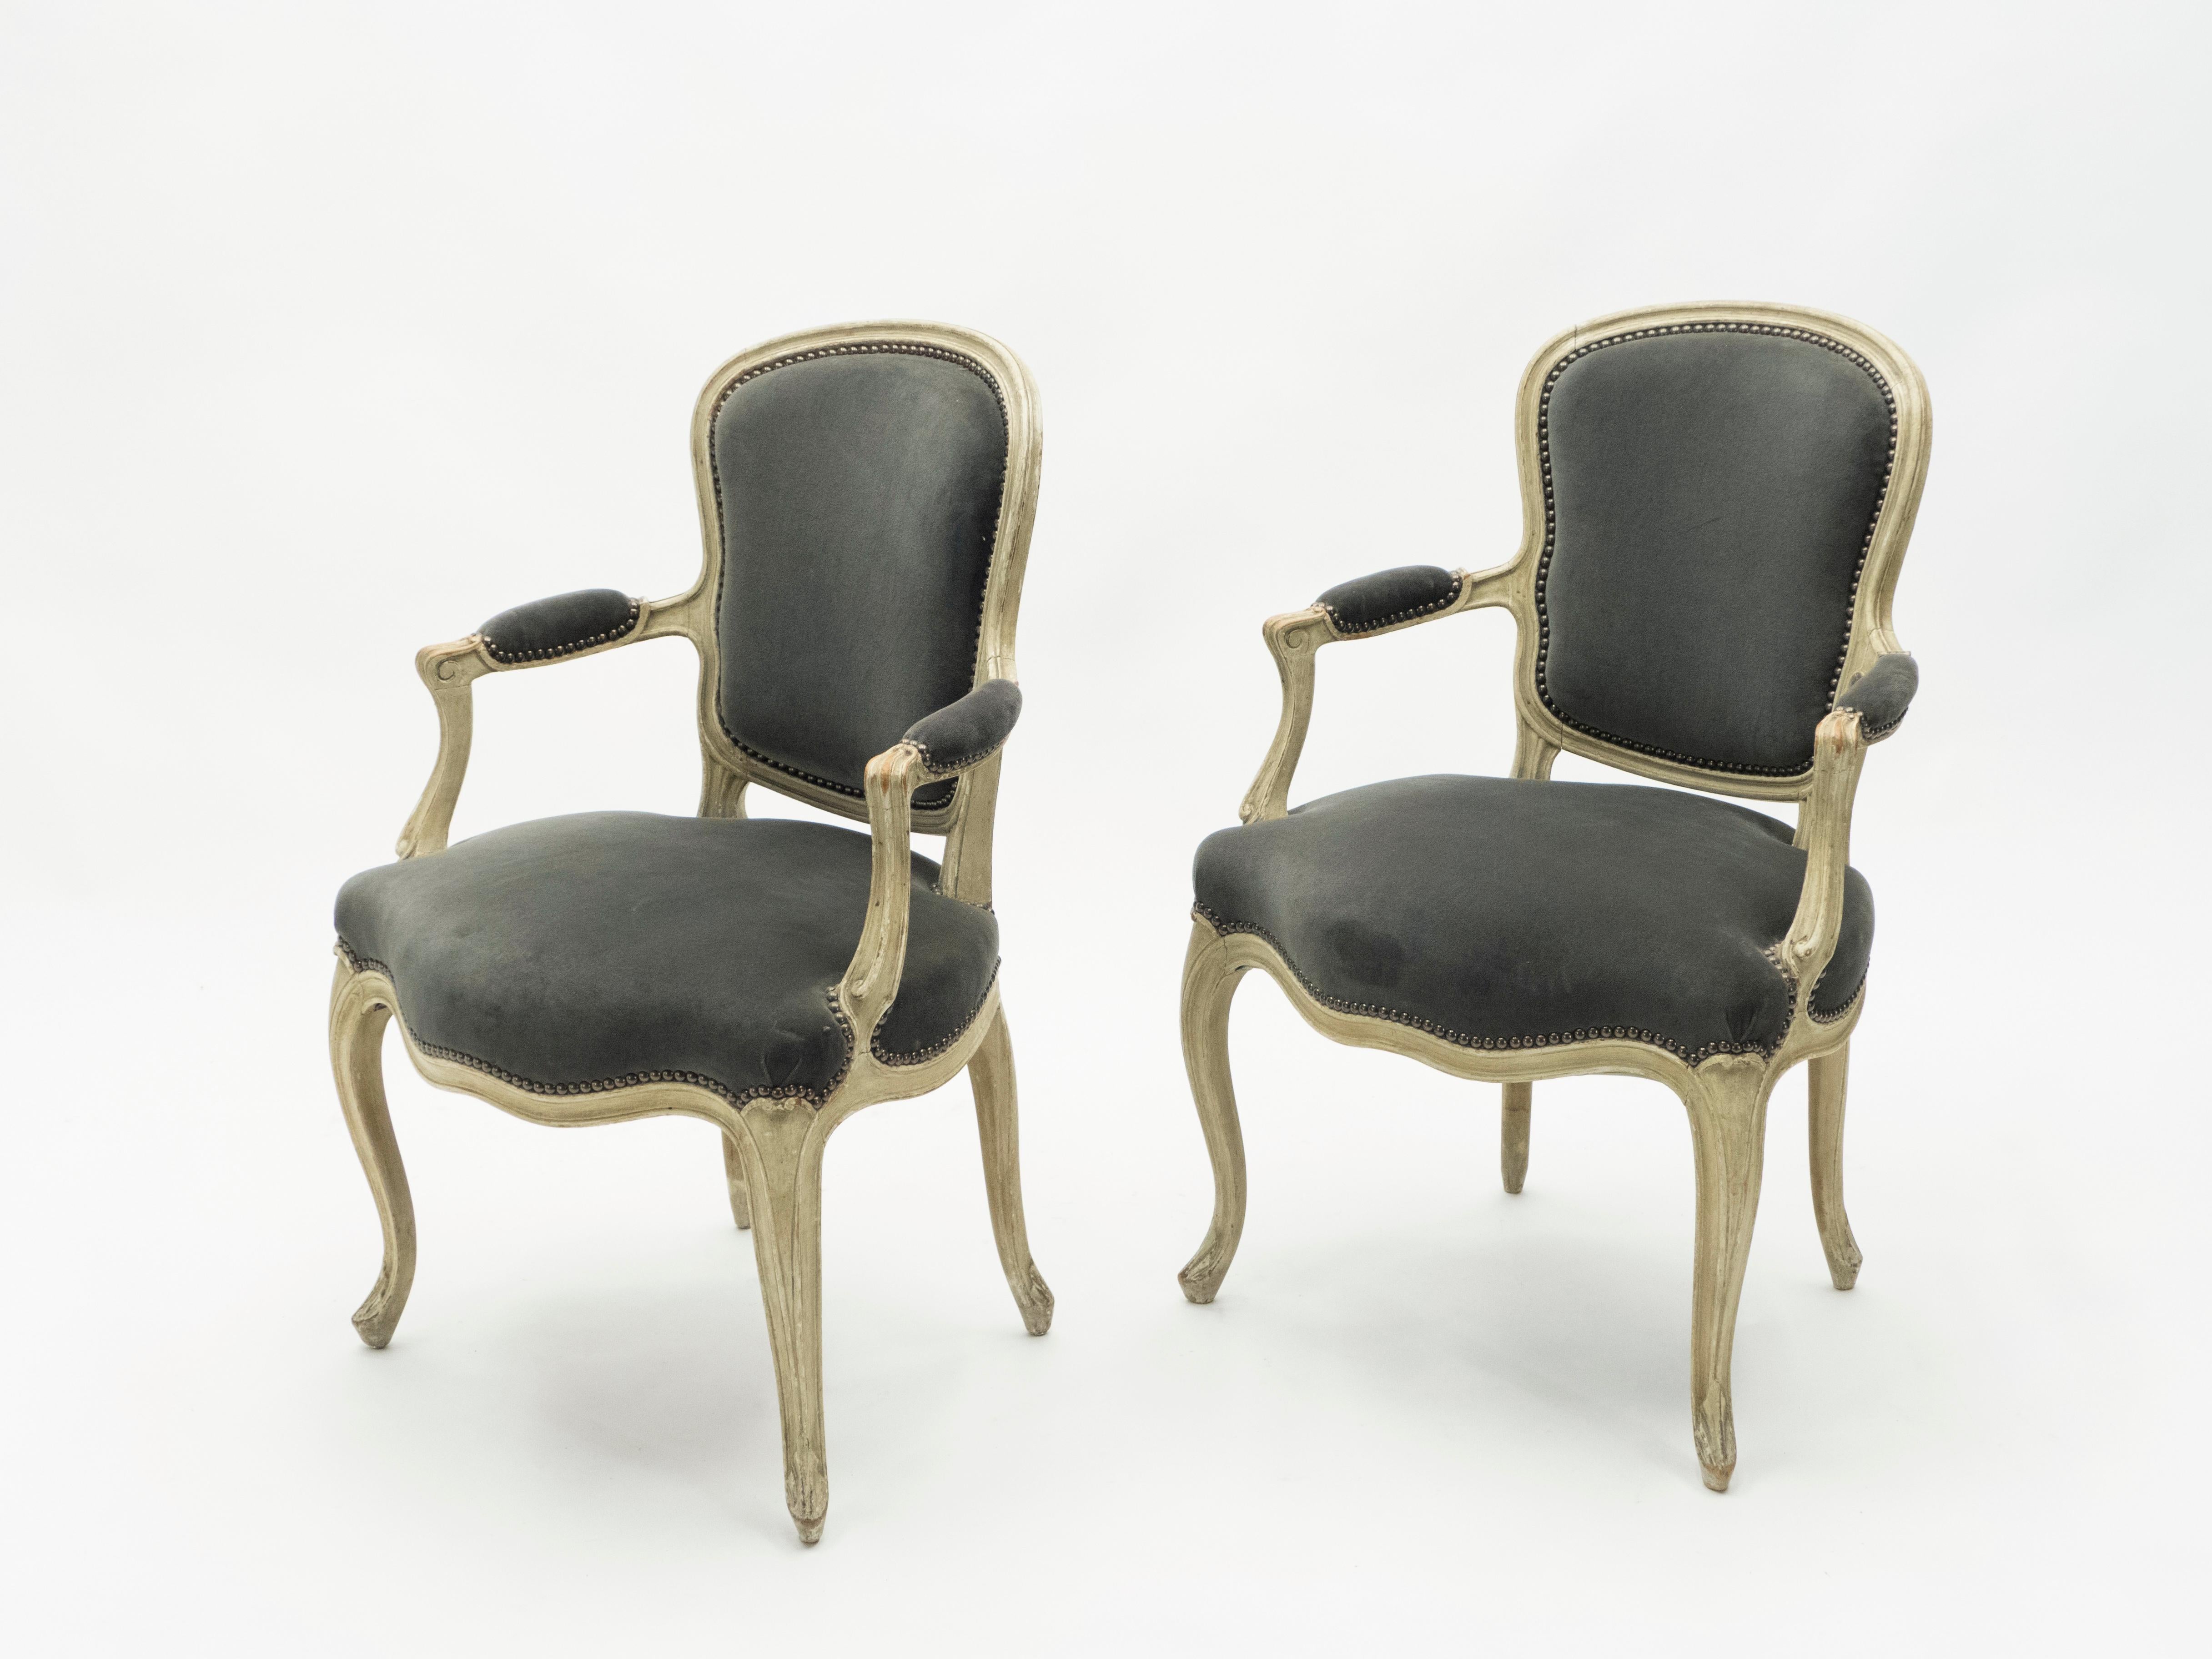 The construction of this pair of armchairs was deeply cared about, and it shows in the finished product, even some eight decades later. The armchairs were made and stamped by French firm Maison Jansen in the early 1940s in their pure Neoclassical